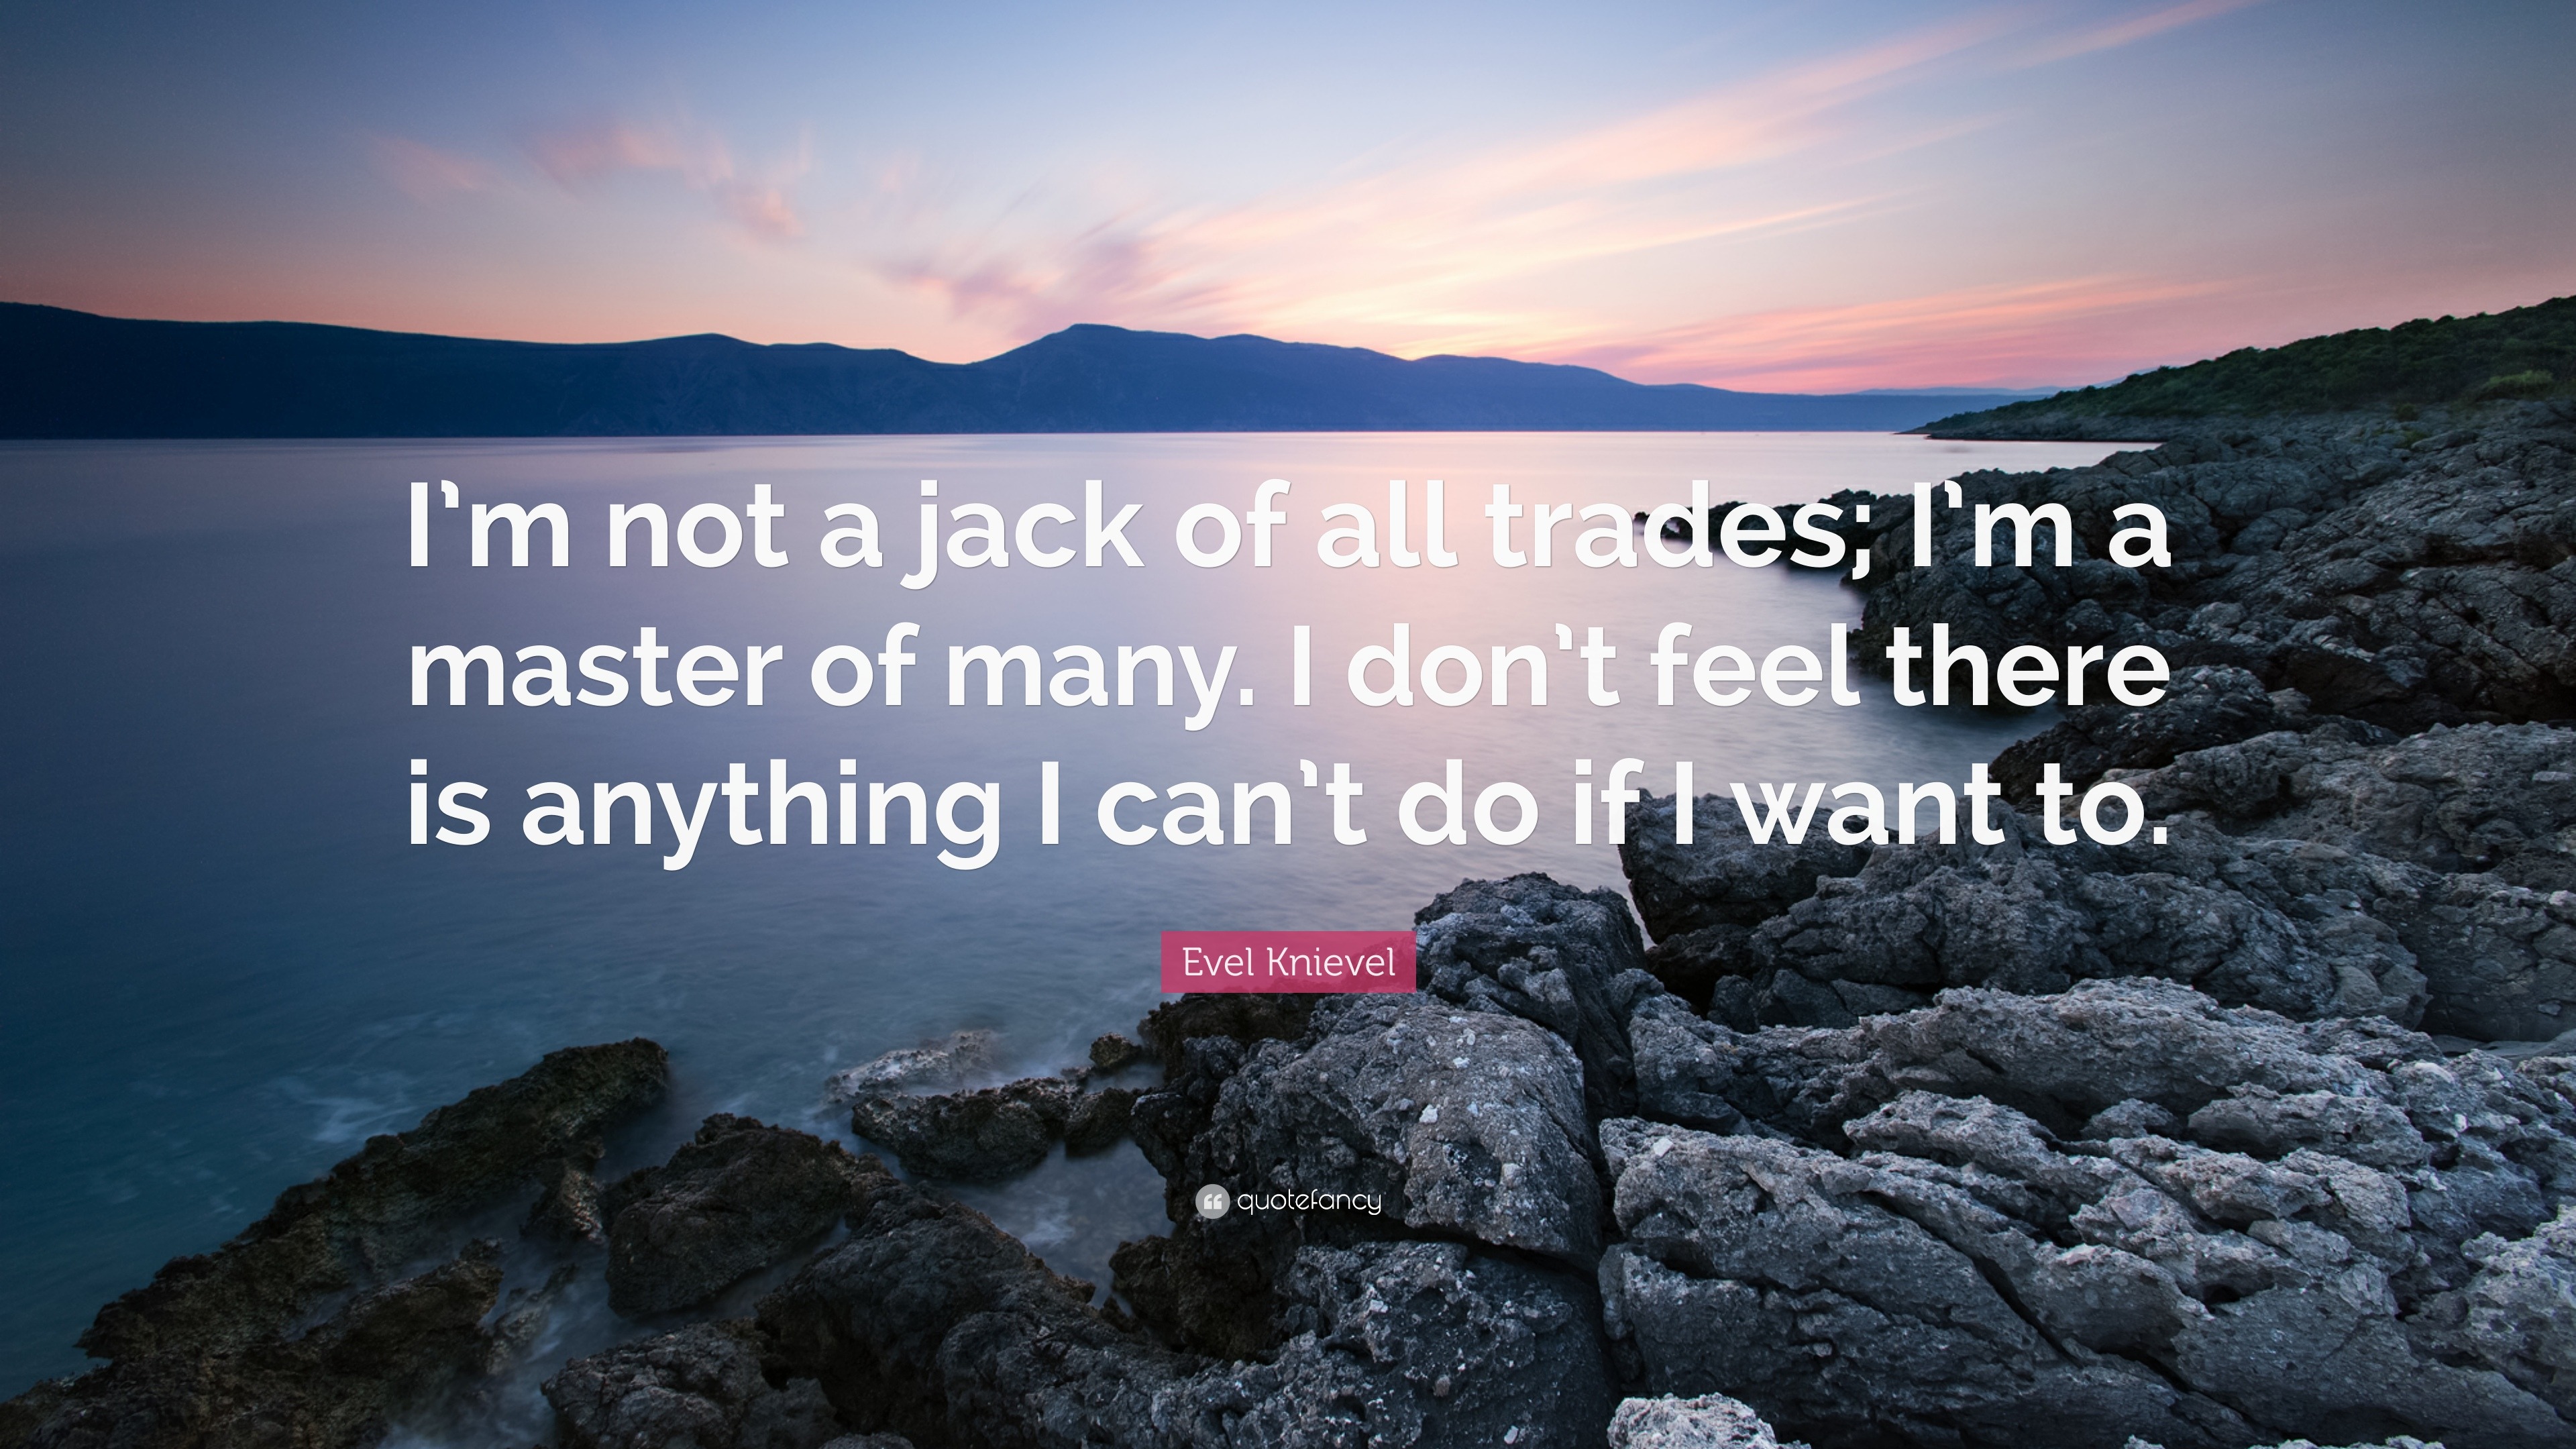 10 Inspiring Jack of All Trades Quotes